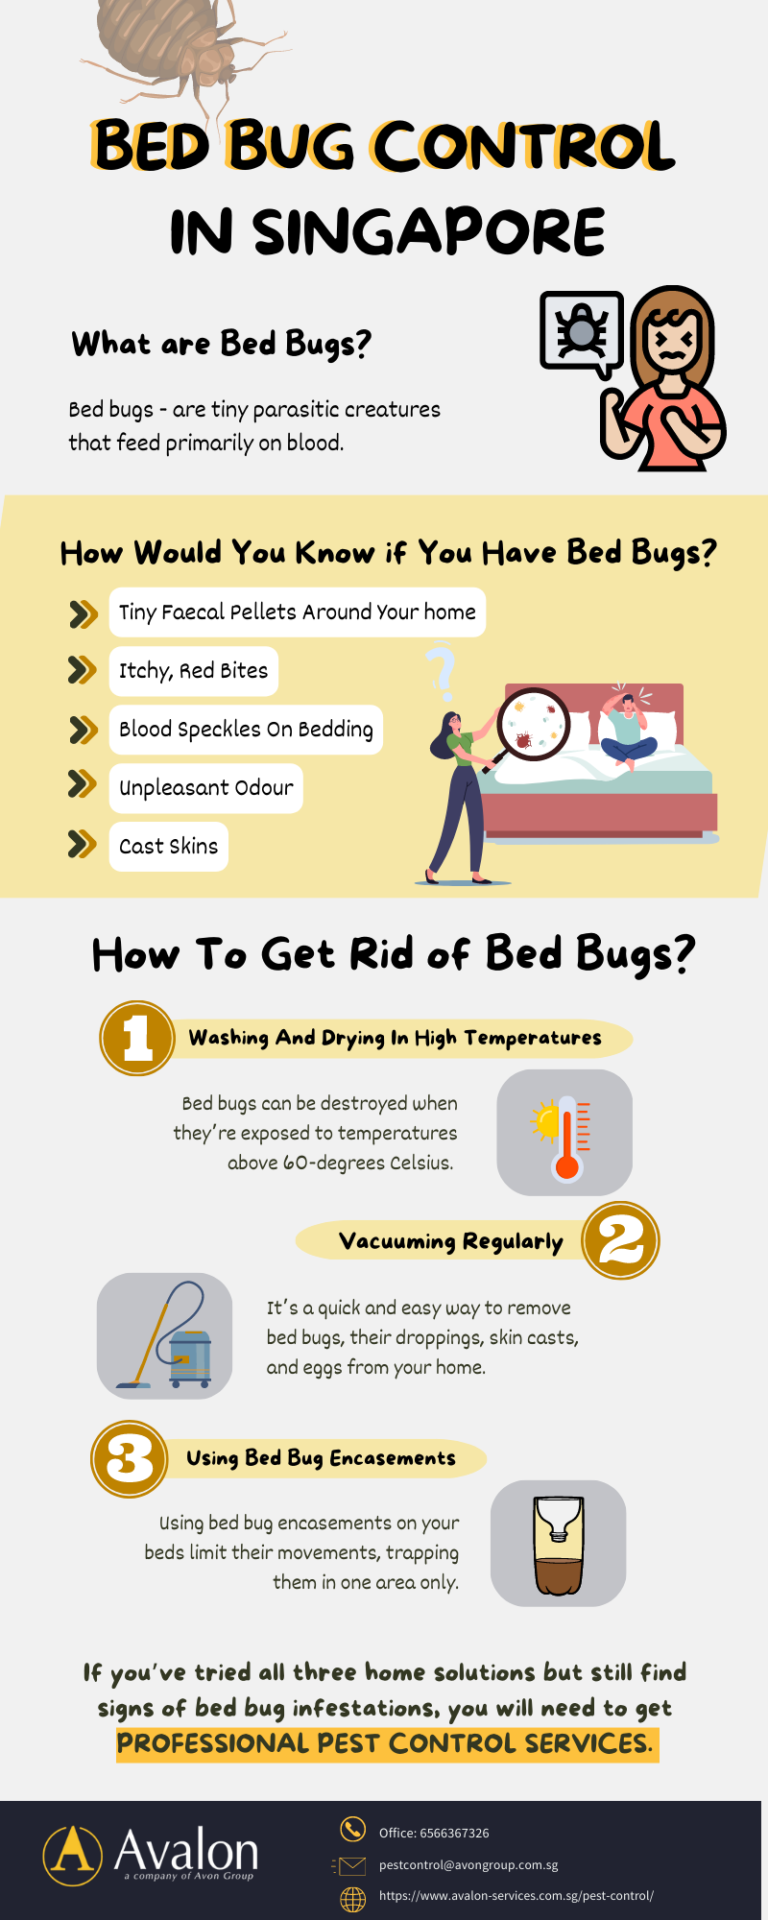 Best Way to Get Rid of Bed Bugs!